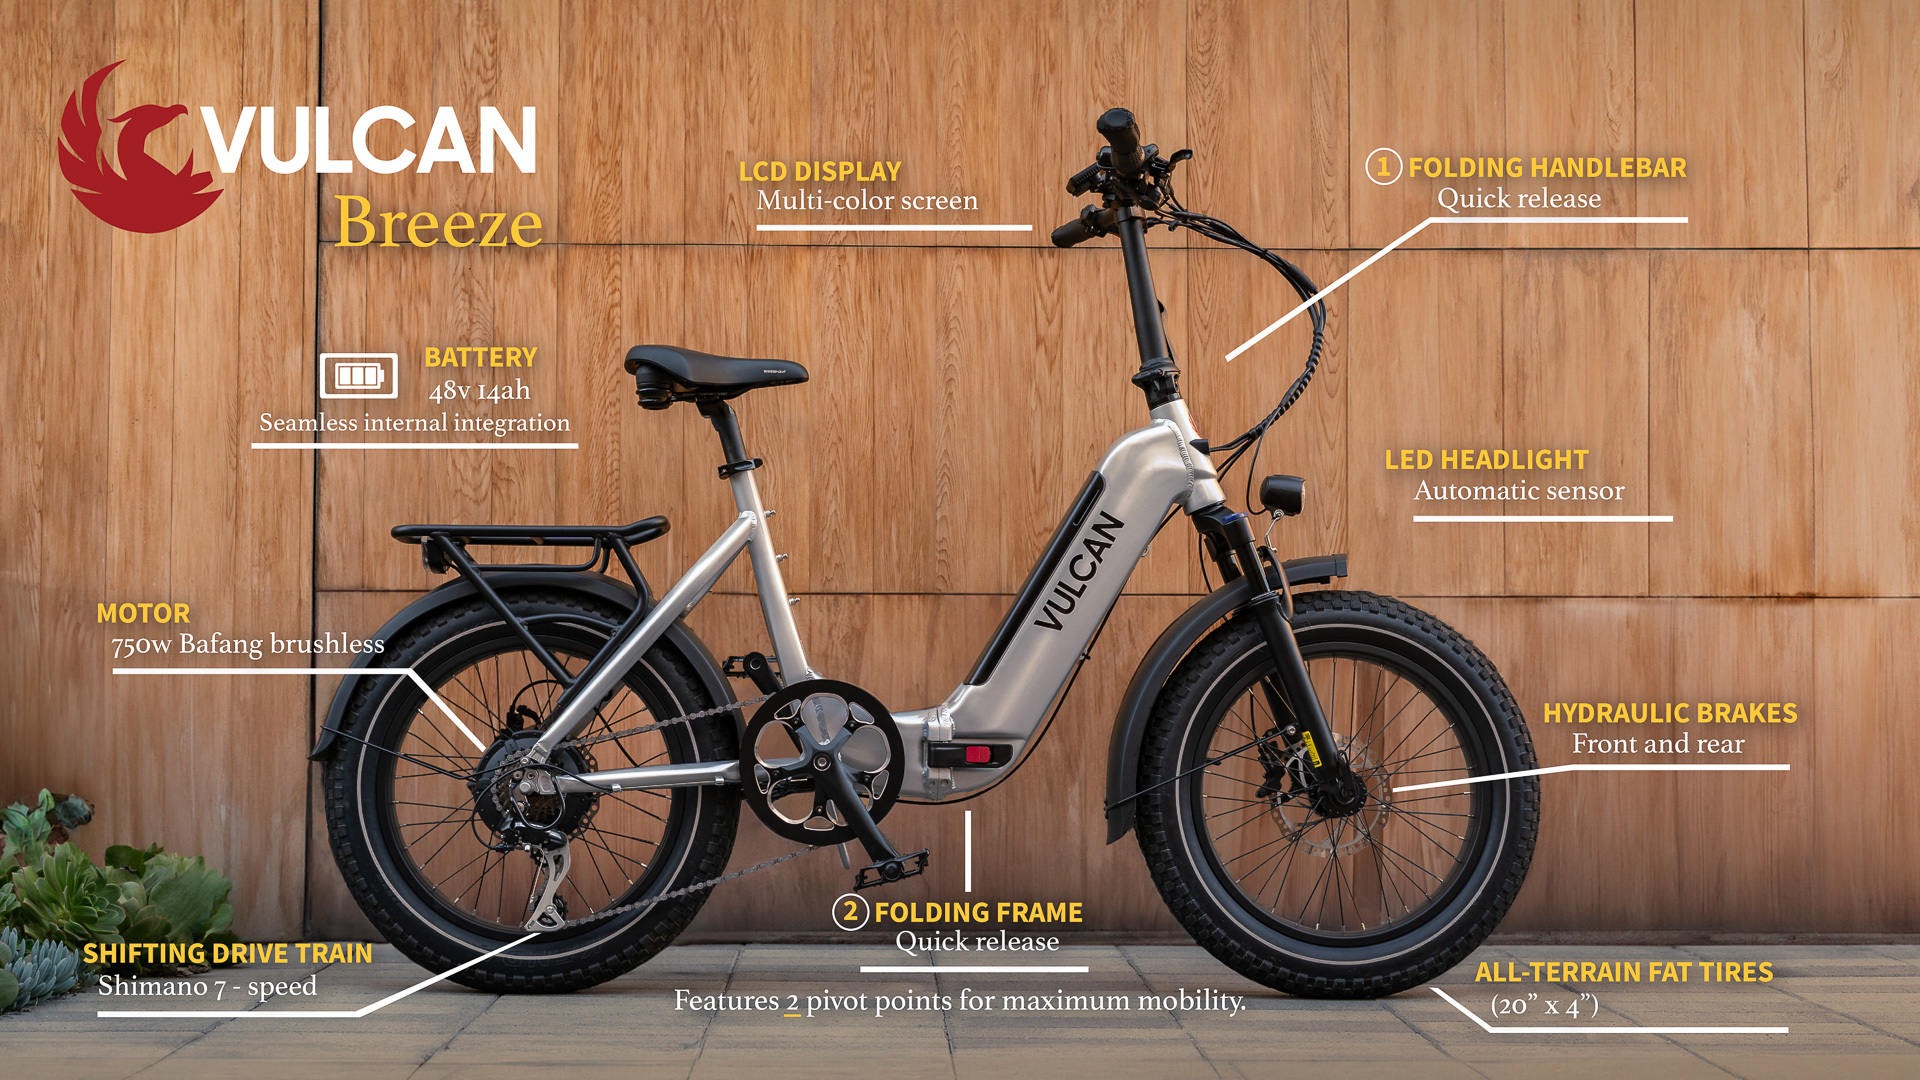 Displays the technical features of the folding electric bicycle